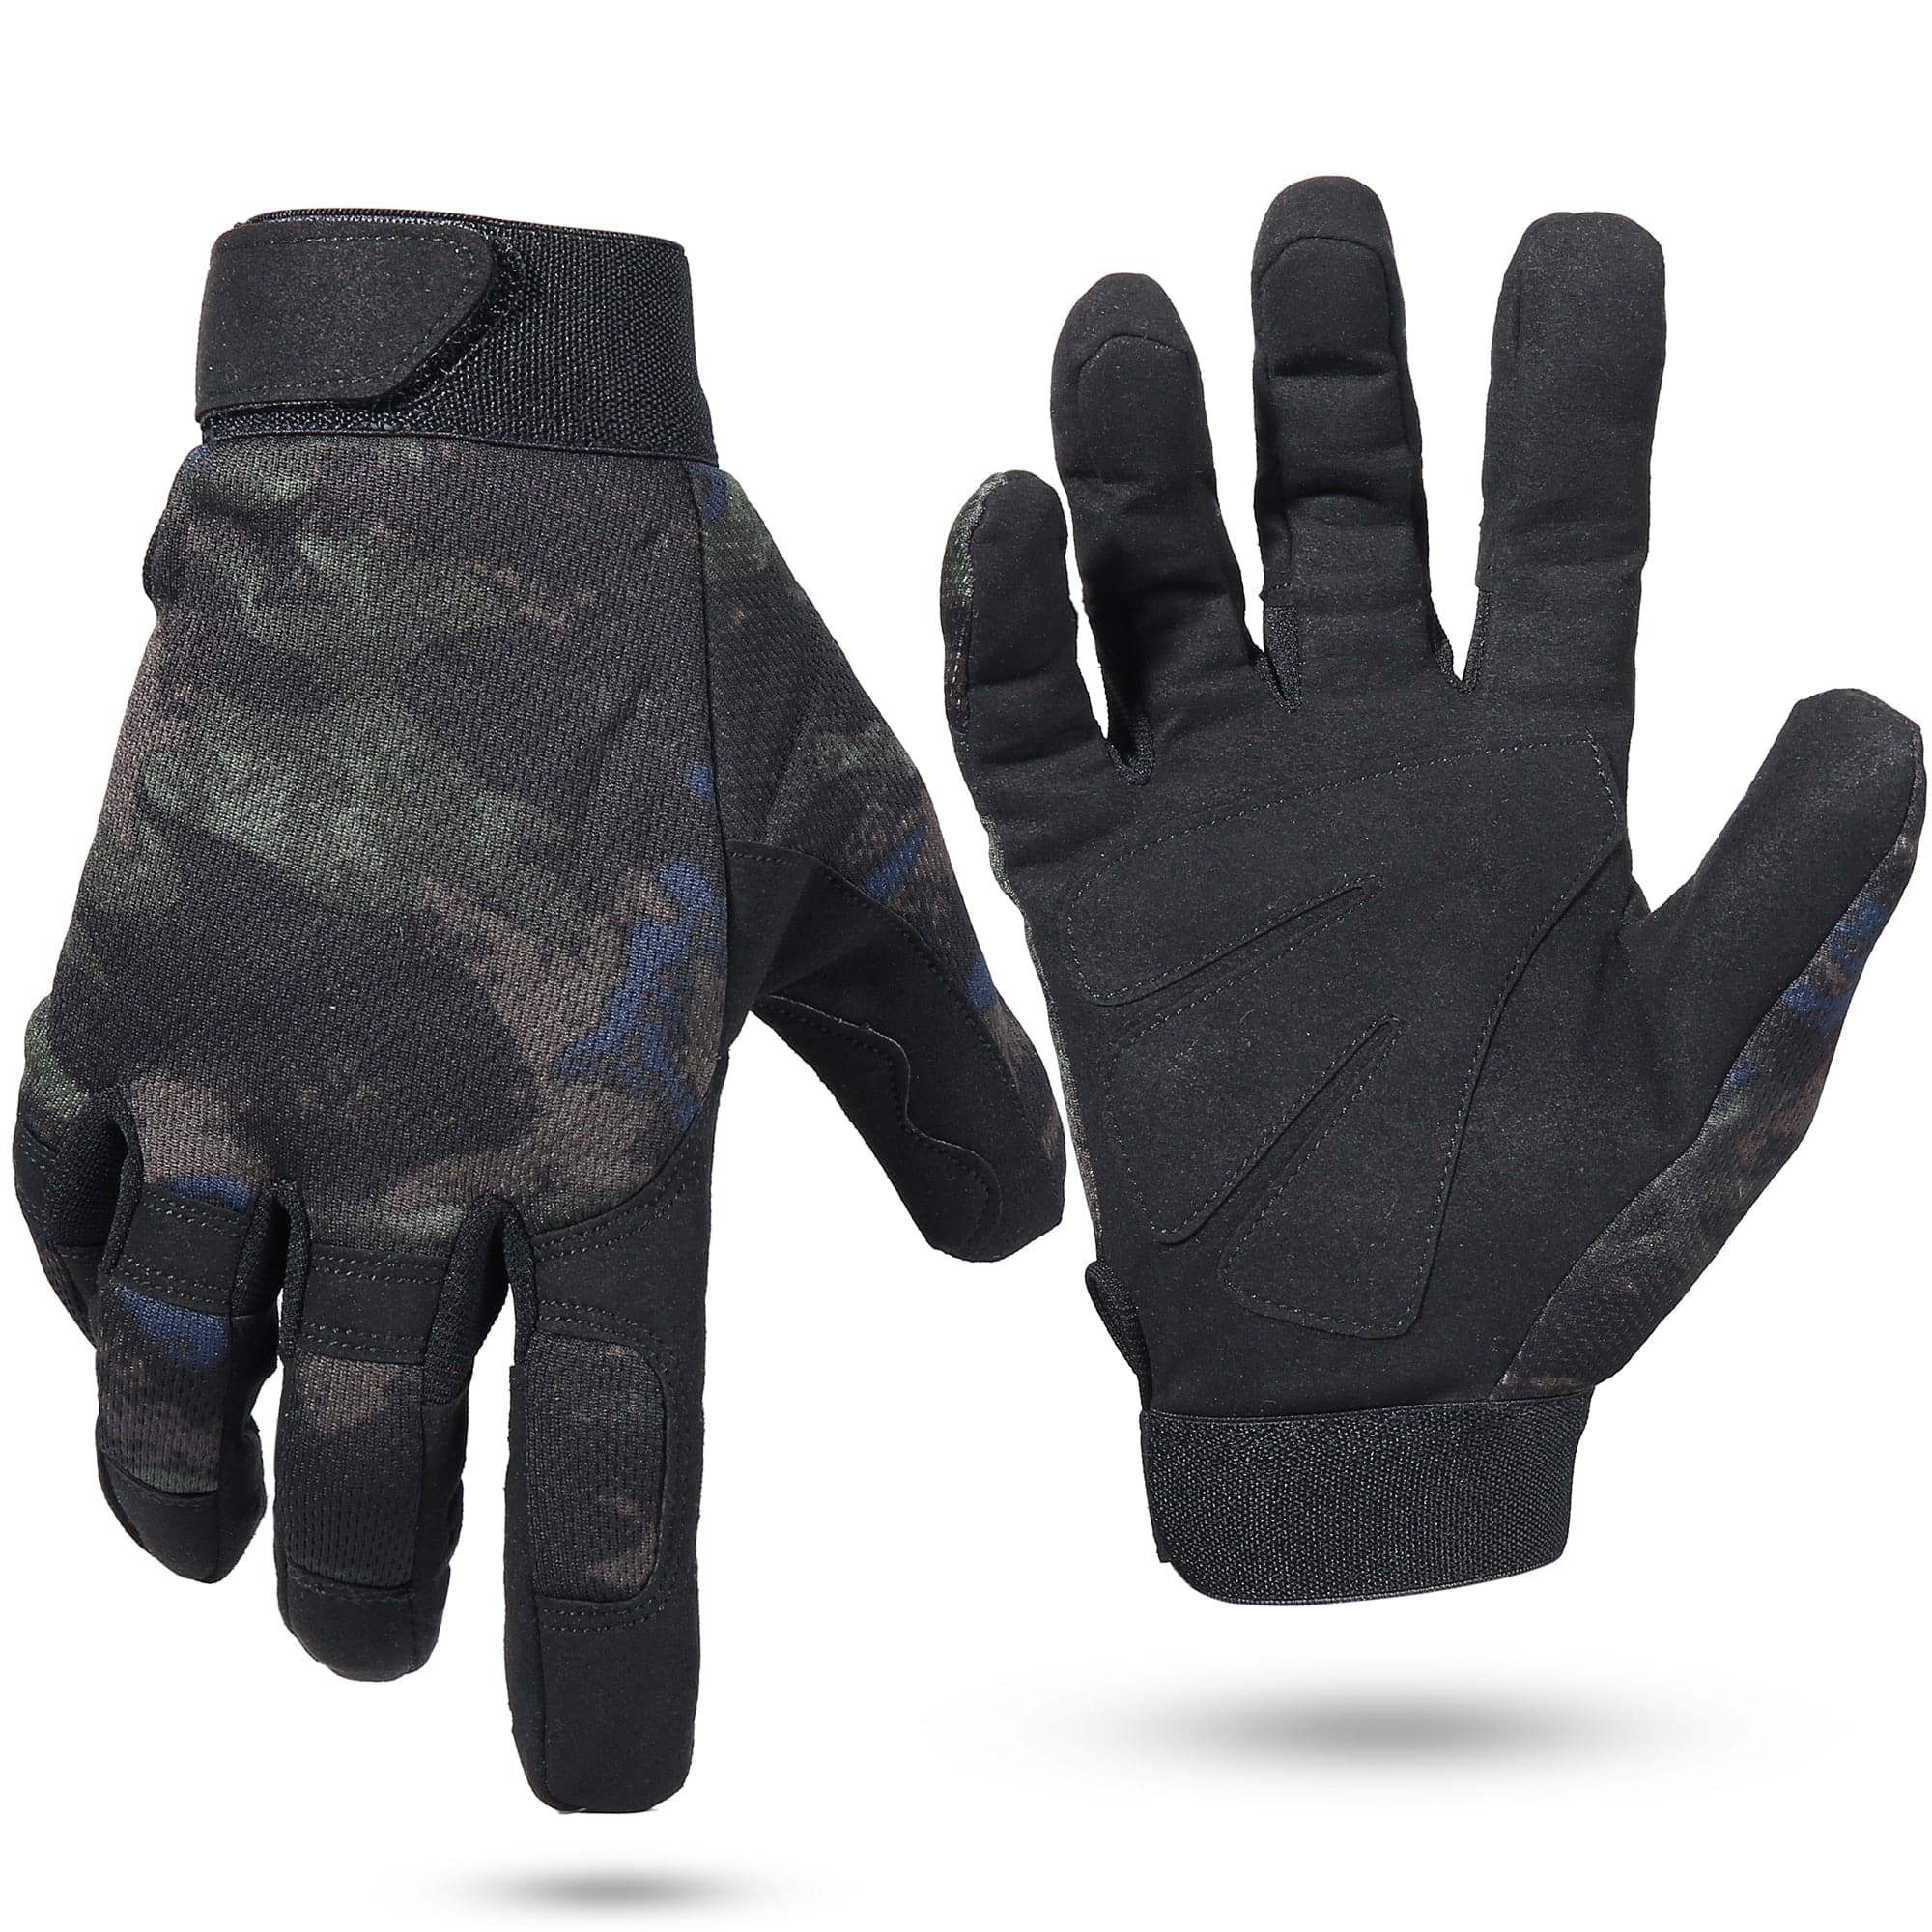 Paintball Bicycle Motorcycle Shoot Work Gear Camo Gloves